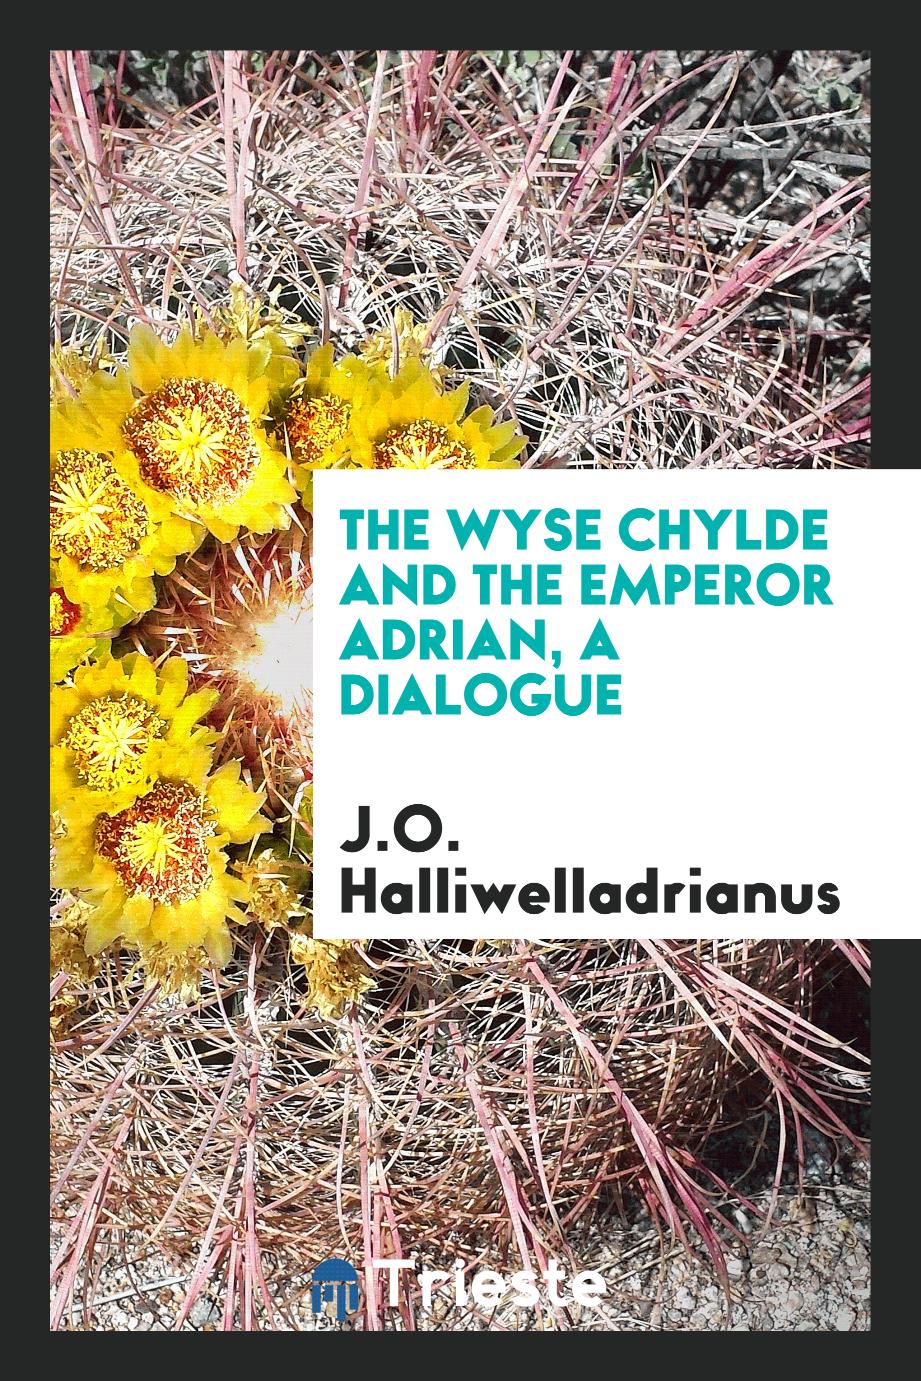 The wyse chylde and the emperor Adrian, a dialogue